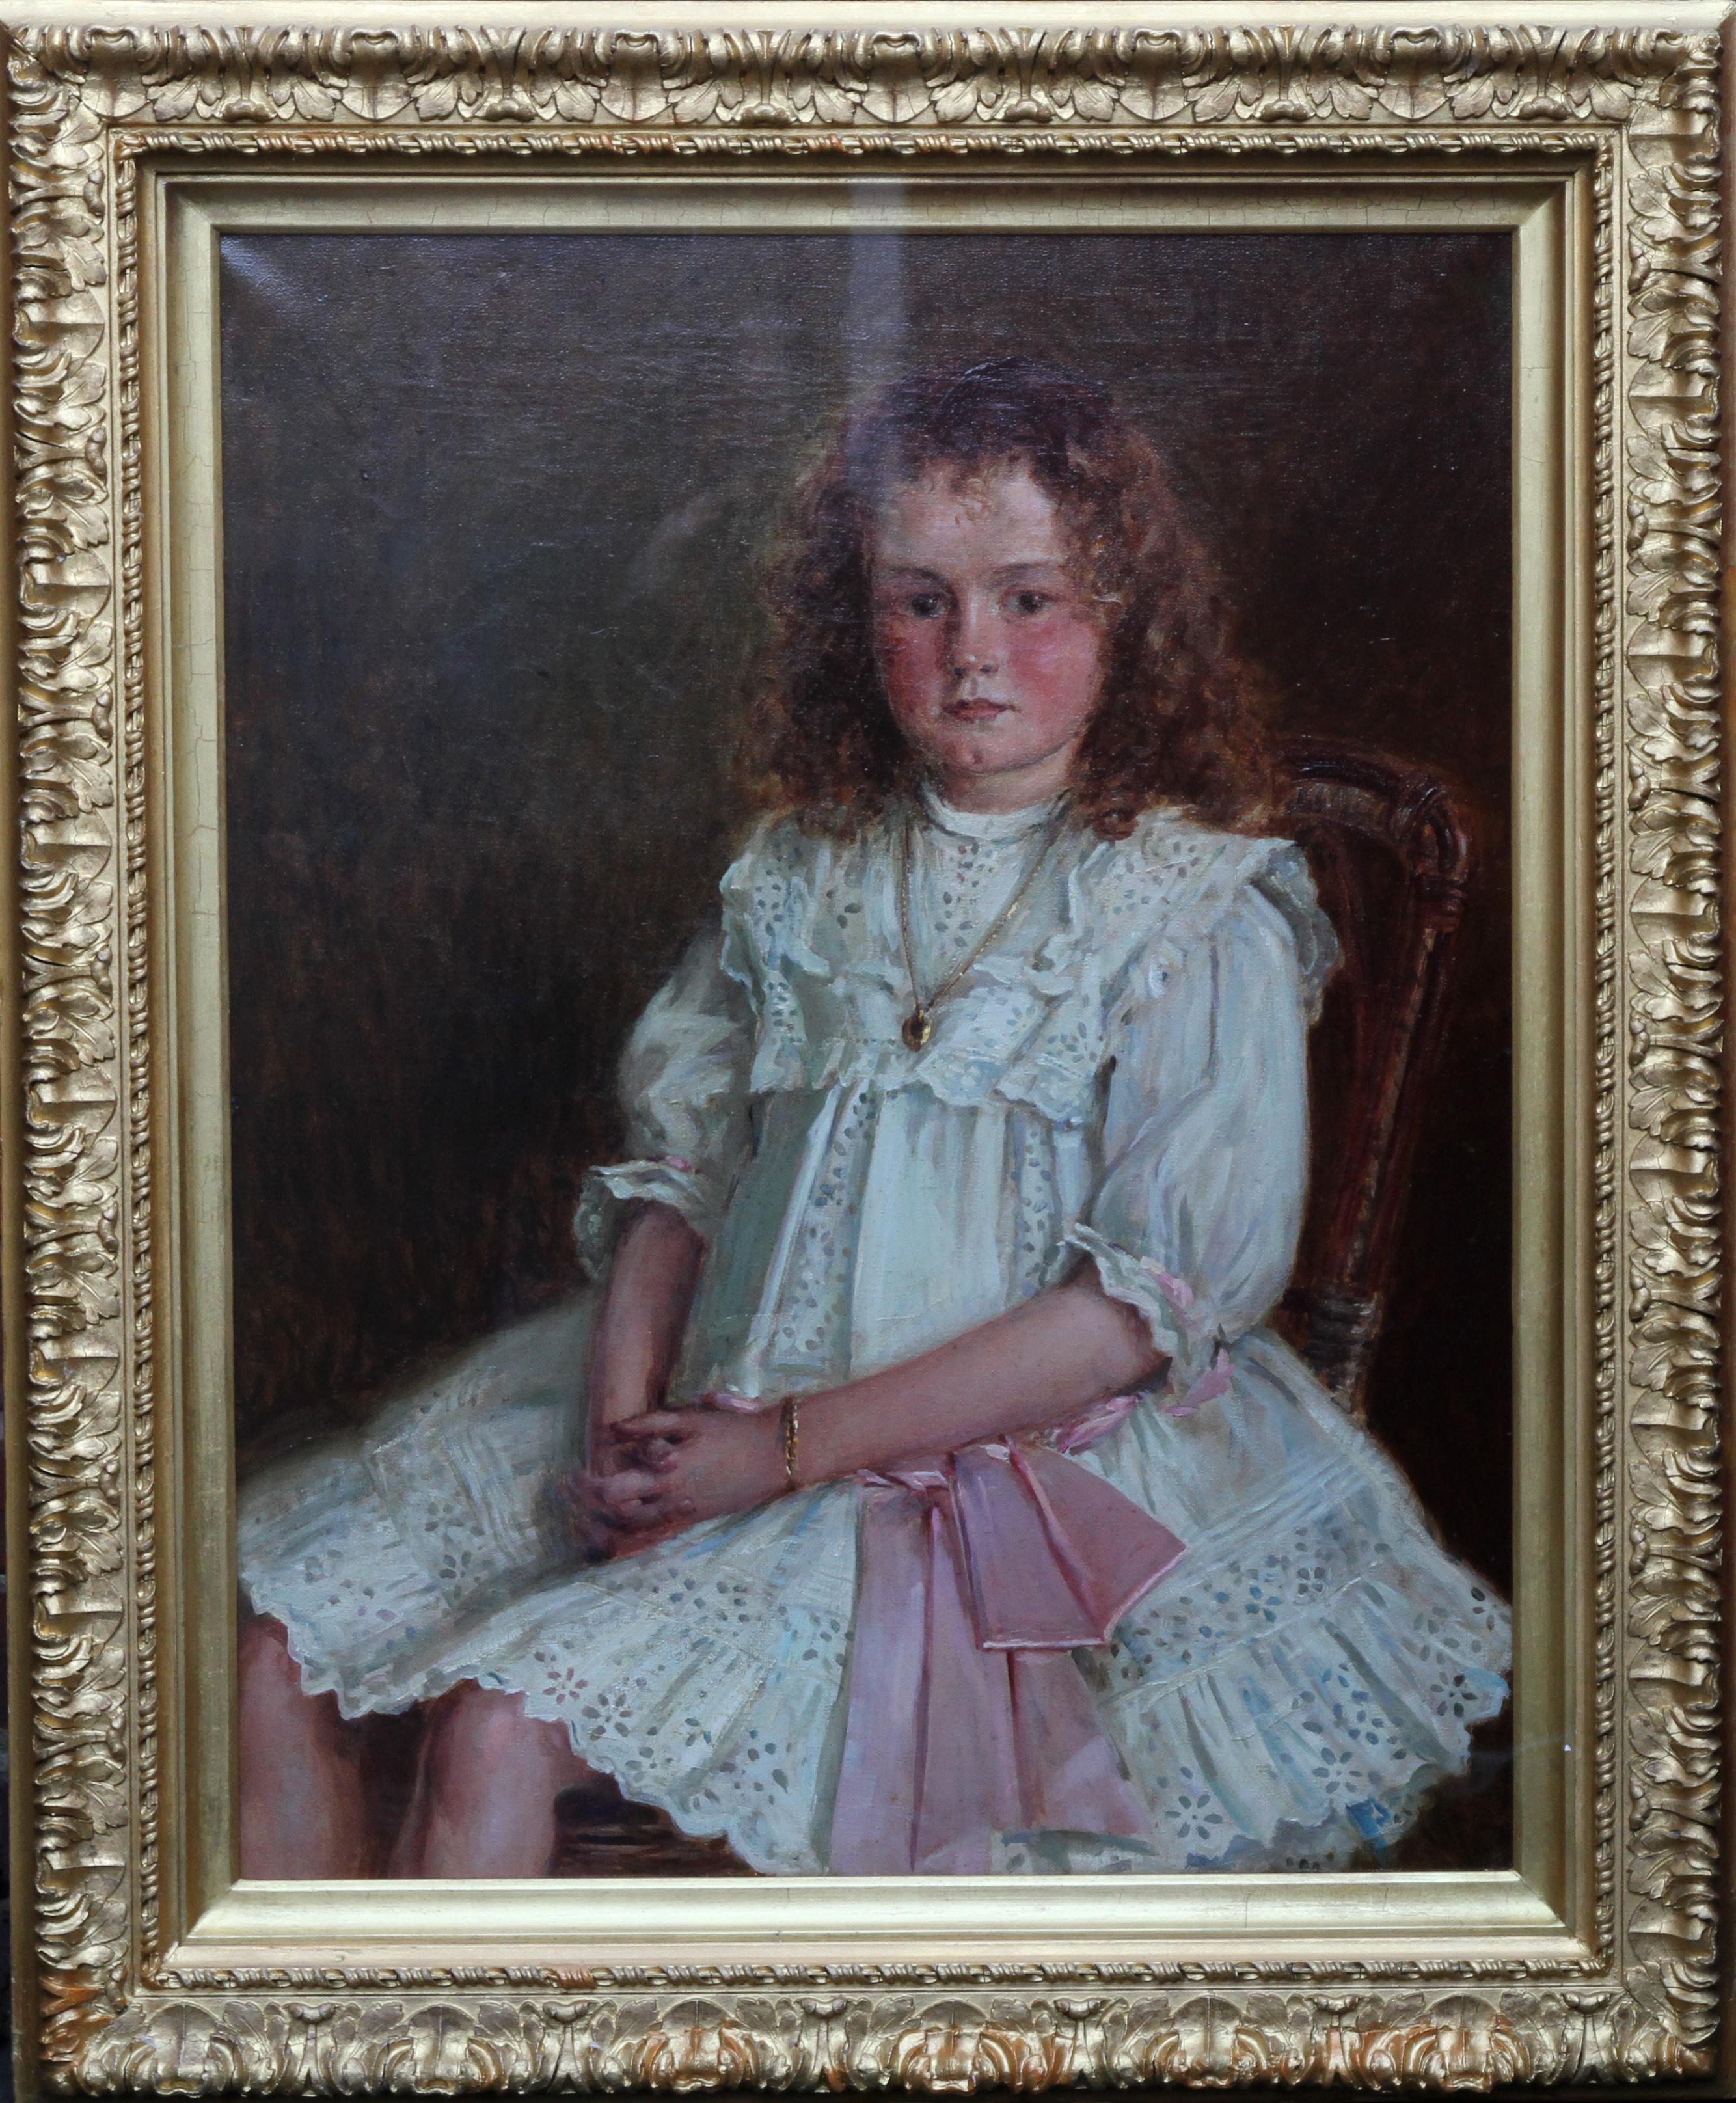 Portrait of a Young Welsh Girl - Enid Richards - British Edwardian Staithes art For Sale 6